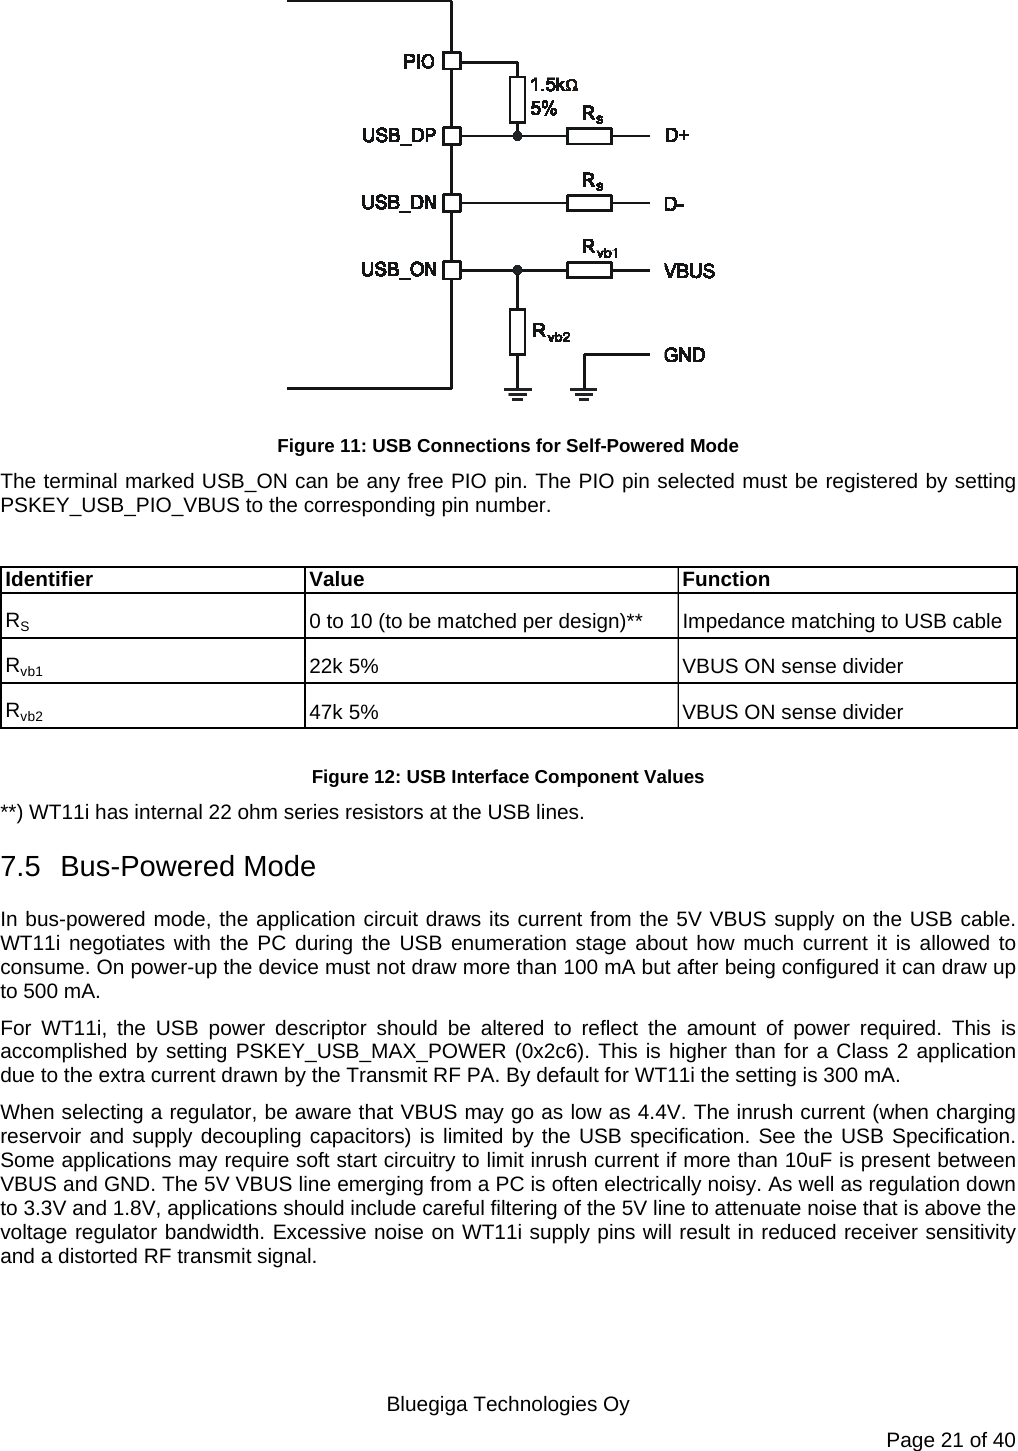   Bluegiga Technologies Oy Page 21 of 40  Figure 11: USB Connections for Self-Powered Mode The terminal marked USB_ON can be any free PIO pin. The PIO pin selected must be registered by setting PSKEY_USB_PIO_VBUS to the corresponding pin number.  IdentifierValue FunctionRS0 to 10 (to be matched per design)** Impedance matching to USB cableRvb122k 5% VBUS ON sense dividerRvb247k 5% VBUS ON sense divider Figure 12: USB Interface Component Values **) WT11i has internal 22 ohm series resistors at the USB lines. 7.5 Bus-Powered Mode In bus-powered mode, the application circuit draws its current from the 5V VBUS supply on the USB cable. WT11i negotiates with the PC during the USB enumeration stage about how much current it is allowed to consume. On power-up the device must not draw more than 100 mA but after being configured it can draw up to 500 mA. For WT11i, the USB power descriptor should be altered to reflect the amount of power required. This is accomplished by setting PSKEY_USB_MAX_POWER (0x2c6). This is higher than for a Class 2 application due to the extra current drawn by the Transmit RF PA. By default for WT11i the setting is 300 mA. When selecting a regulator, be aware that VBUS may go as low as 4.4V. The inrush current (when charging reservoir and supply decoupling capacitors) is limited by the USB specification. See the USB Specification. Some applications may require soft start circuitry to limit inrush current if more than 10uF is present between VBUS and GND. The 5V VBUS line emerging from a PC is often electrically noisy. As well as regulation down to 3.3V and 1.8V, applications should include careful filtering of the 5V line to attenuate noise that is above the voltage regulator bandwidth. Excessive noise on WT11i supply pins will result in reduced receiver sensitivity and a distorted RF transmit signal. 